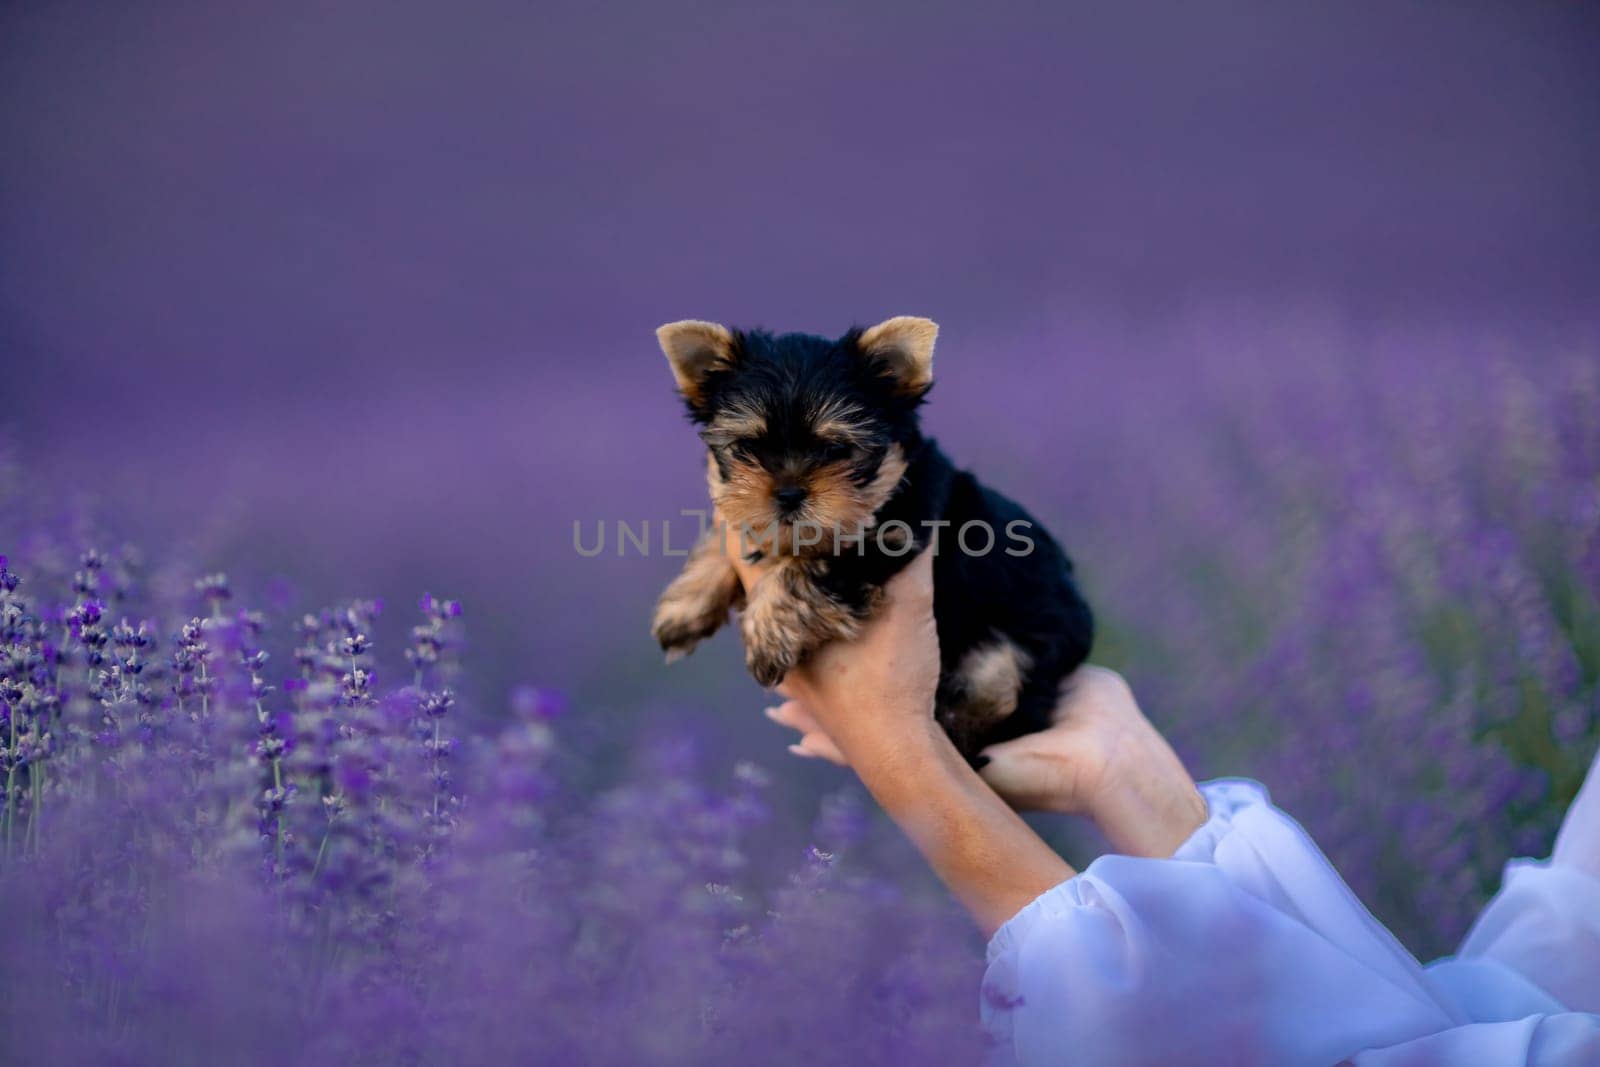 A small black and brown puppy is being held by a person in a field of purple flowers. Scene is peaceful and serene, as the puppy is surrounded by the beauty of nature